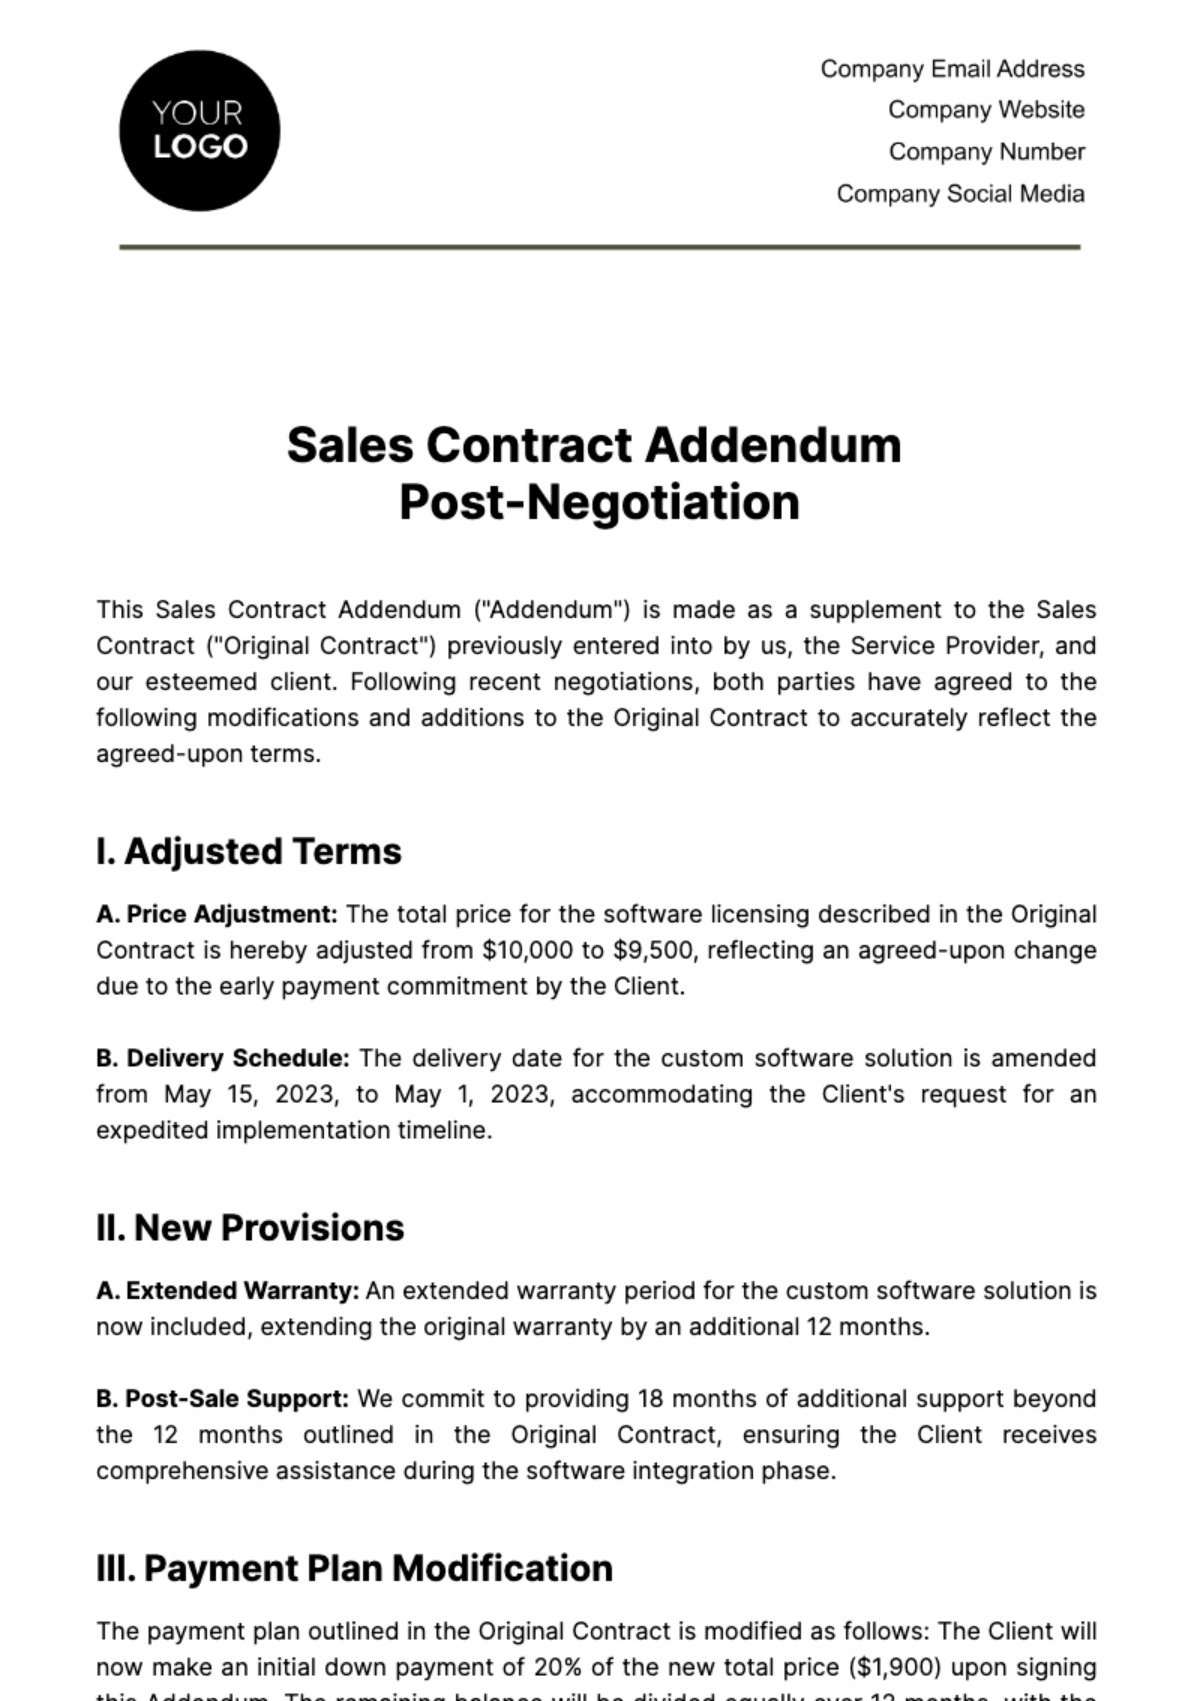 Free Sales Contract Addendum Post-Negotiation Template